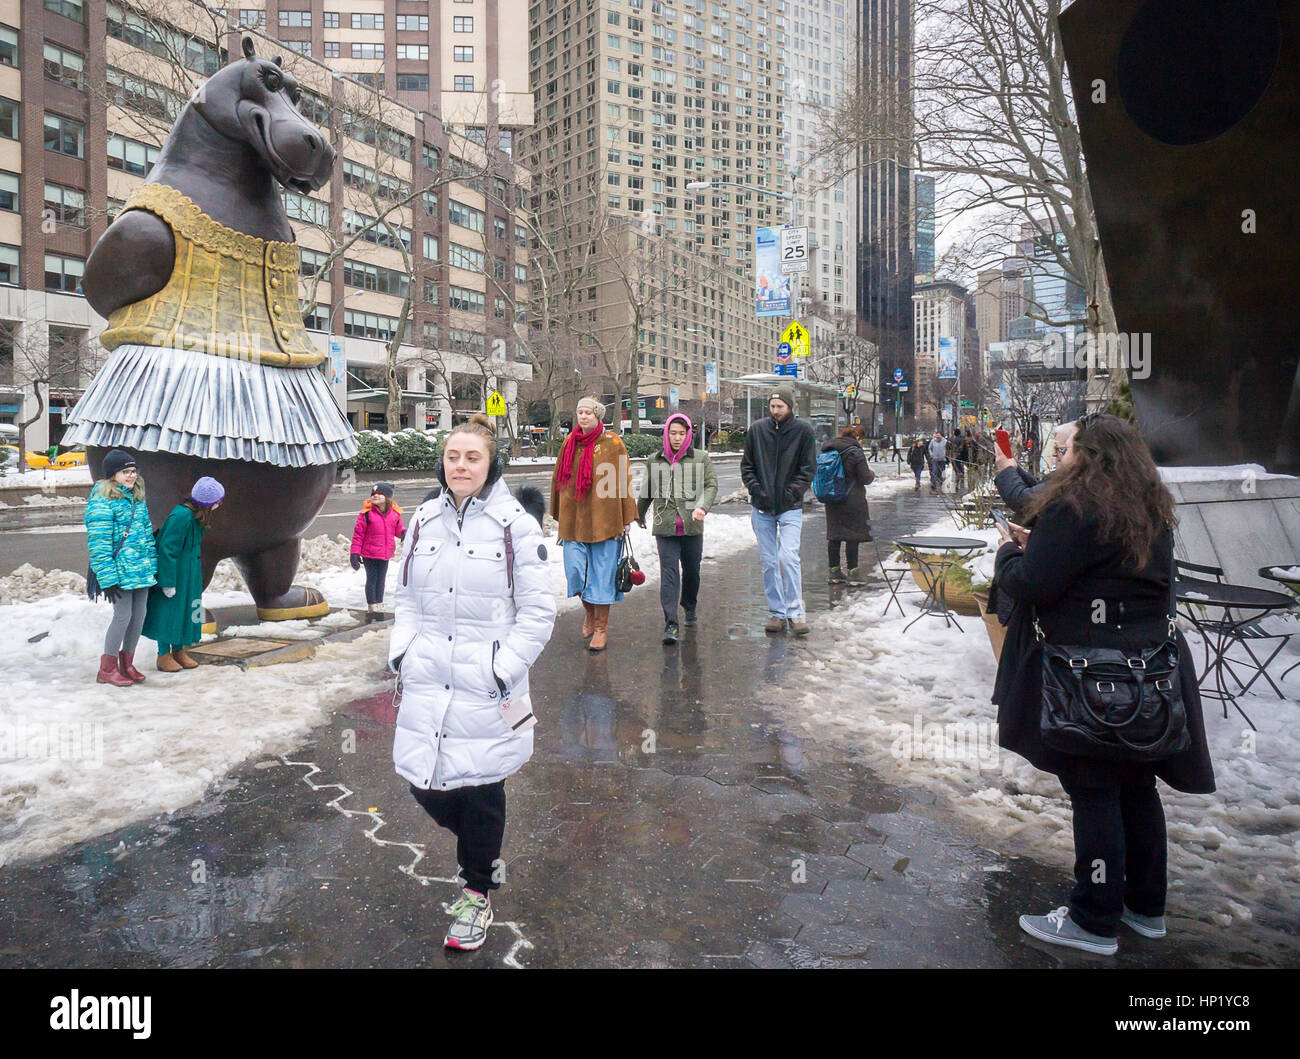 Passer-by delight in the newly installed 'Hippo Ballerina' sculpture by the Danish artist Bjørn Okholm Skaarup in Dante Park across from Lincoln Center in New York on Saturday, February 11, 2017. The 2 and one-half ton, over 15 foot tall bronze sculpture is inspired by the dancing hippos in Disney's 'Fantasia' film and from Degas' ballerina paintings. The popular sculpture will be on display through July 31, 2017. (© Richard B. Levine) Stock Photo